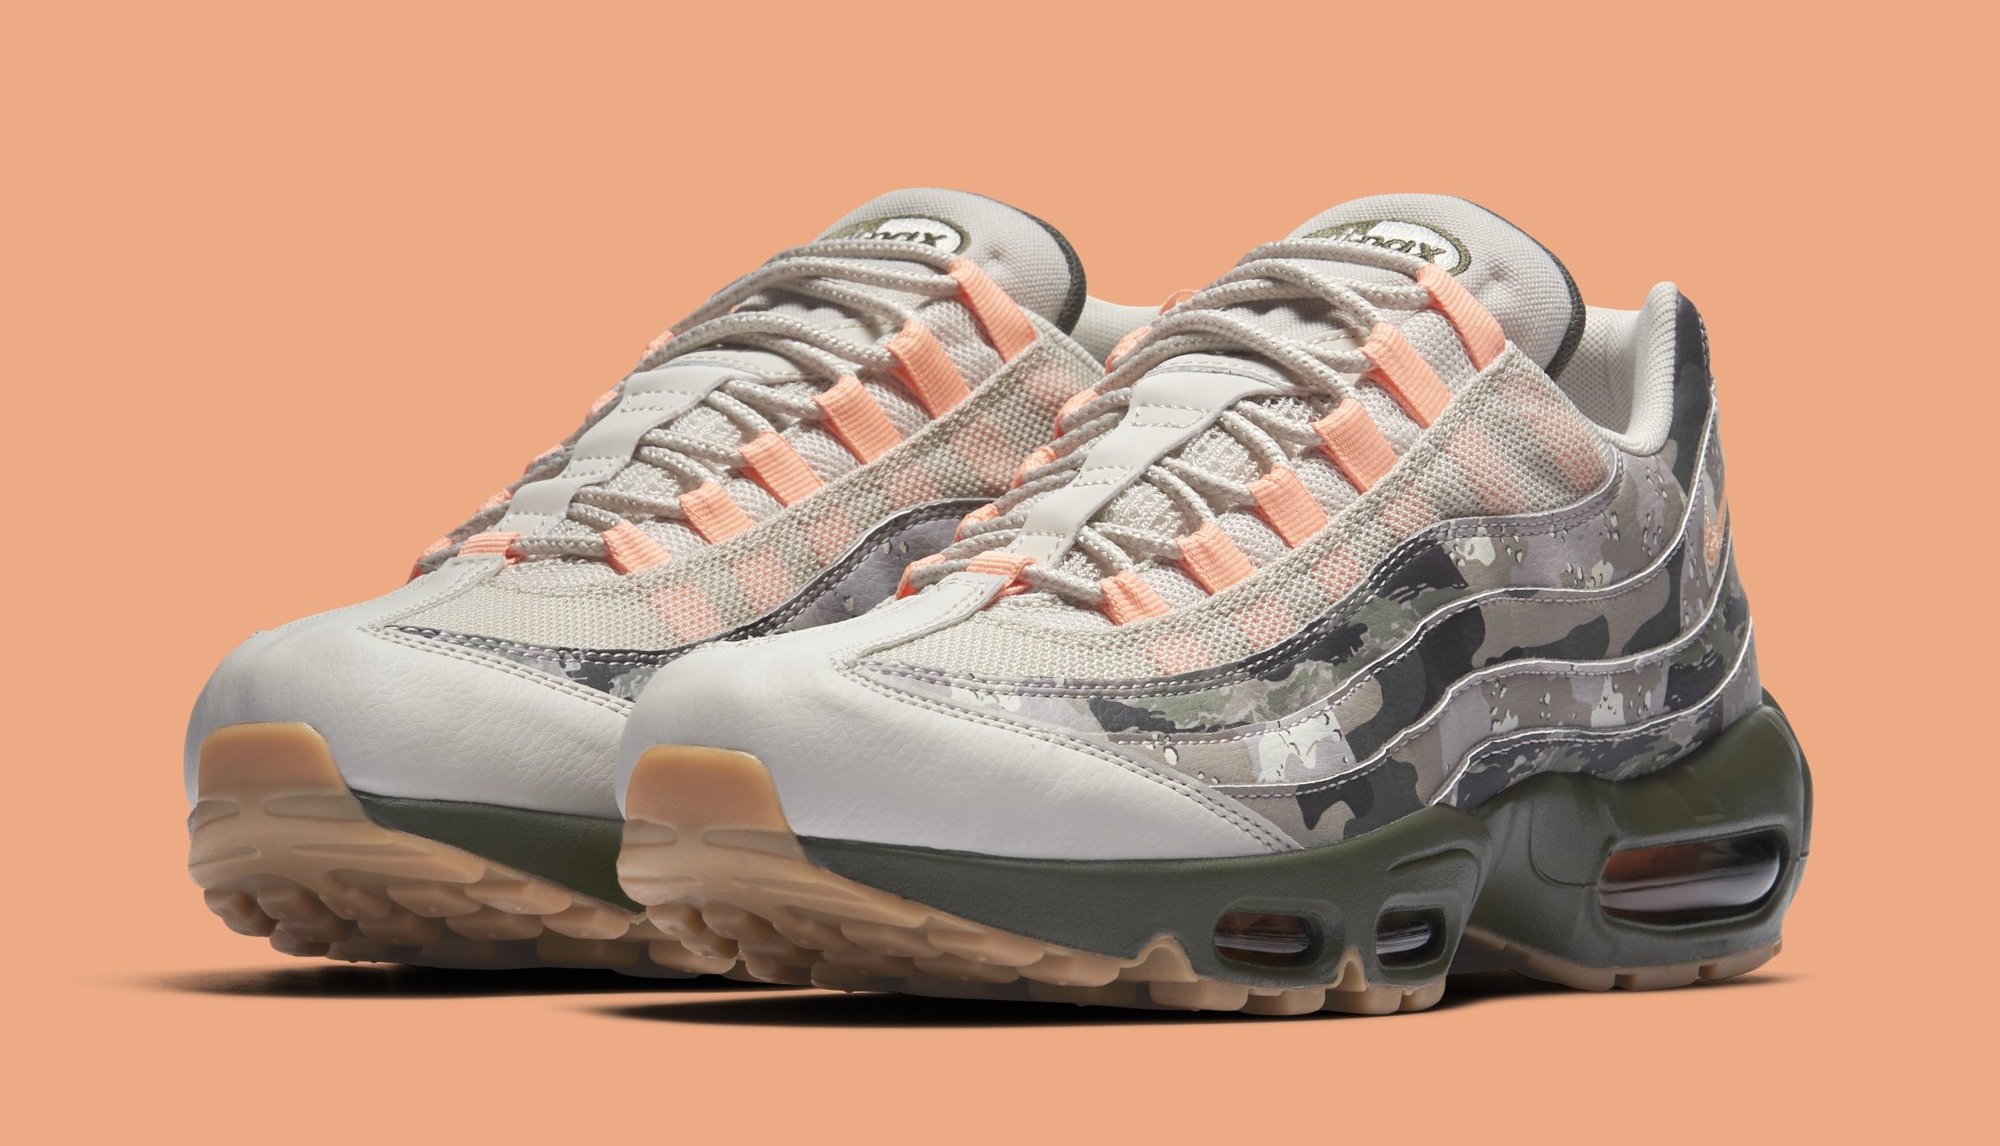 plastic beton pop Nike Covered This Air Max 95 in Desert Camo | Complex